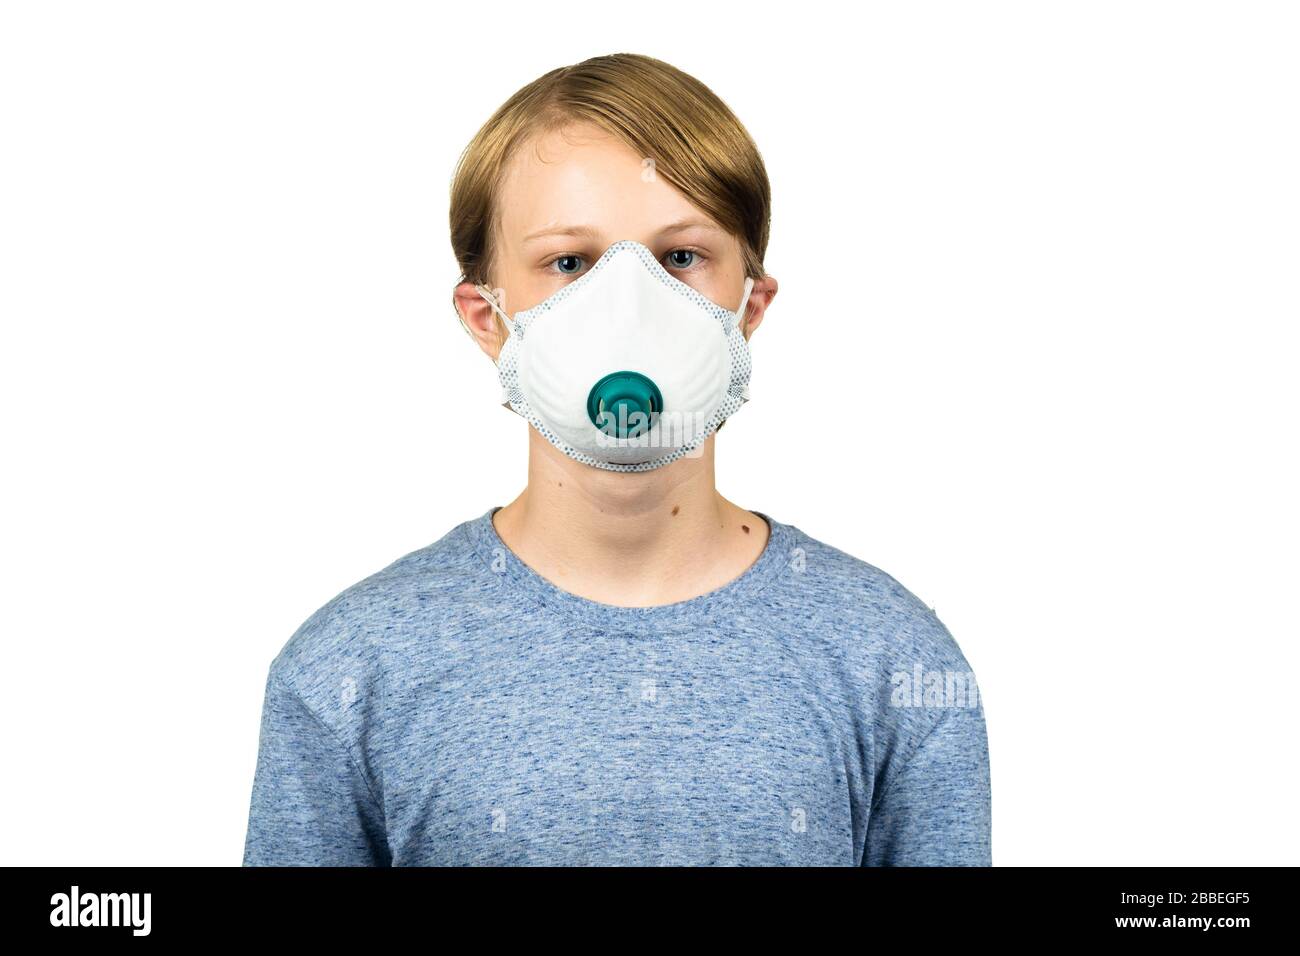 Young teenage boy wearing a protective mask to protect against virus infection.  Isolated on white. Stock Photo